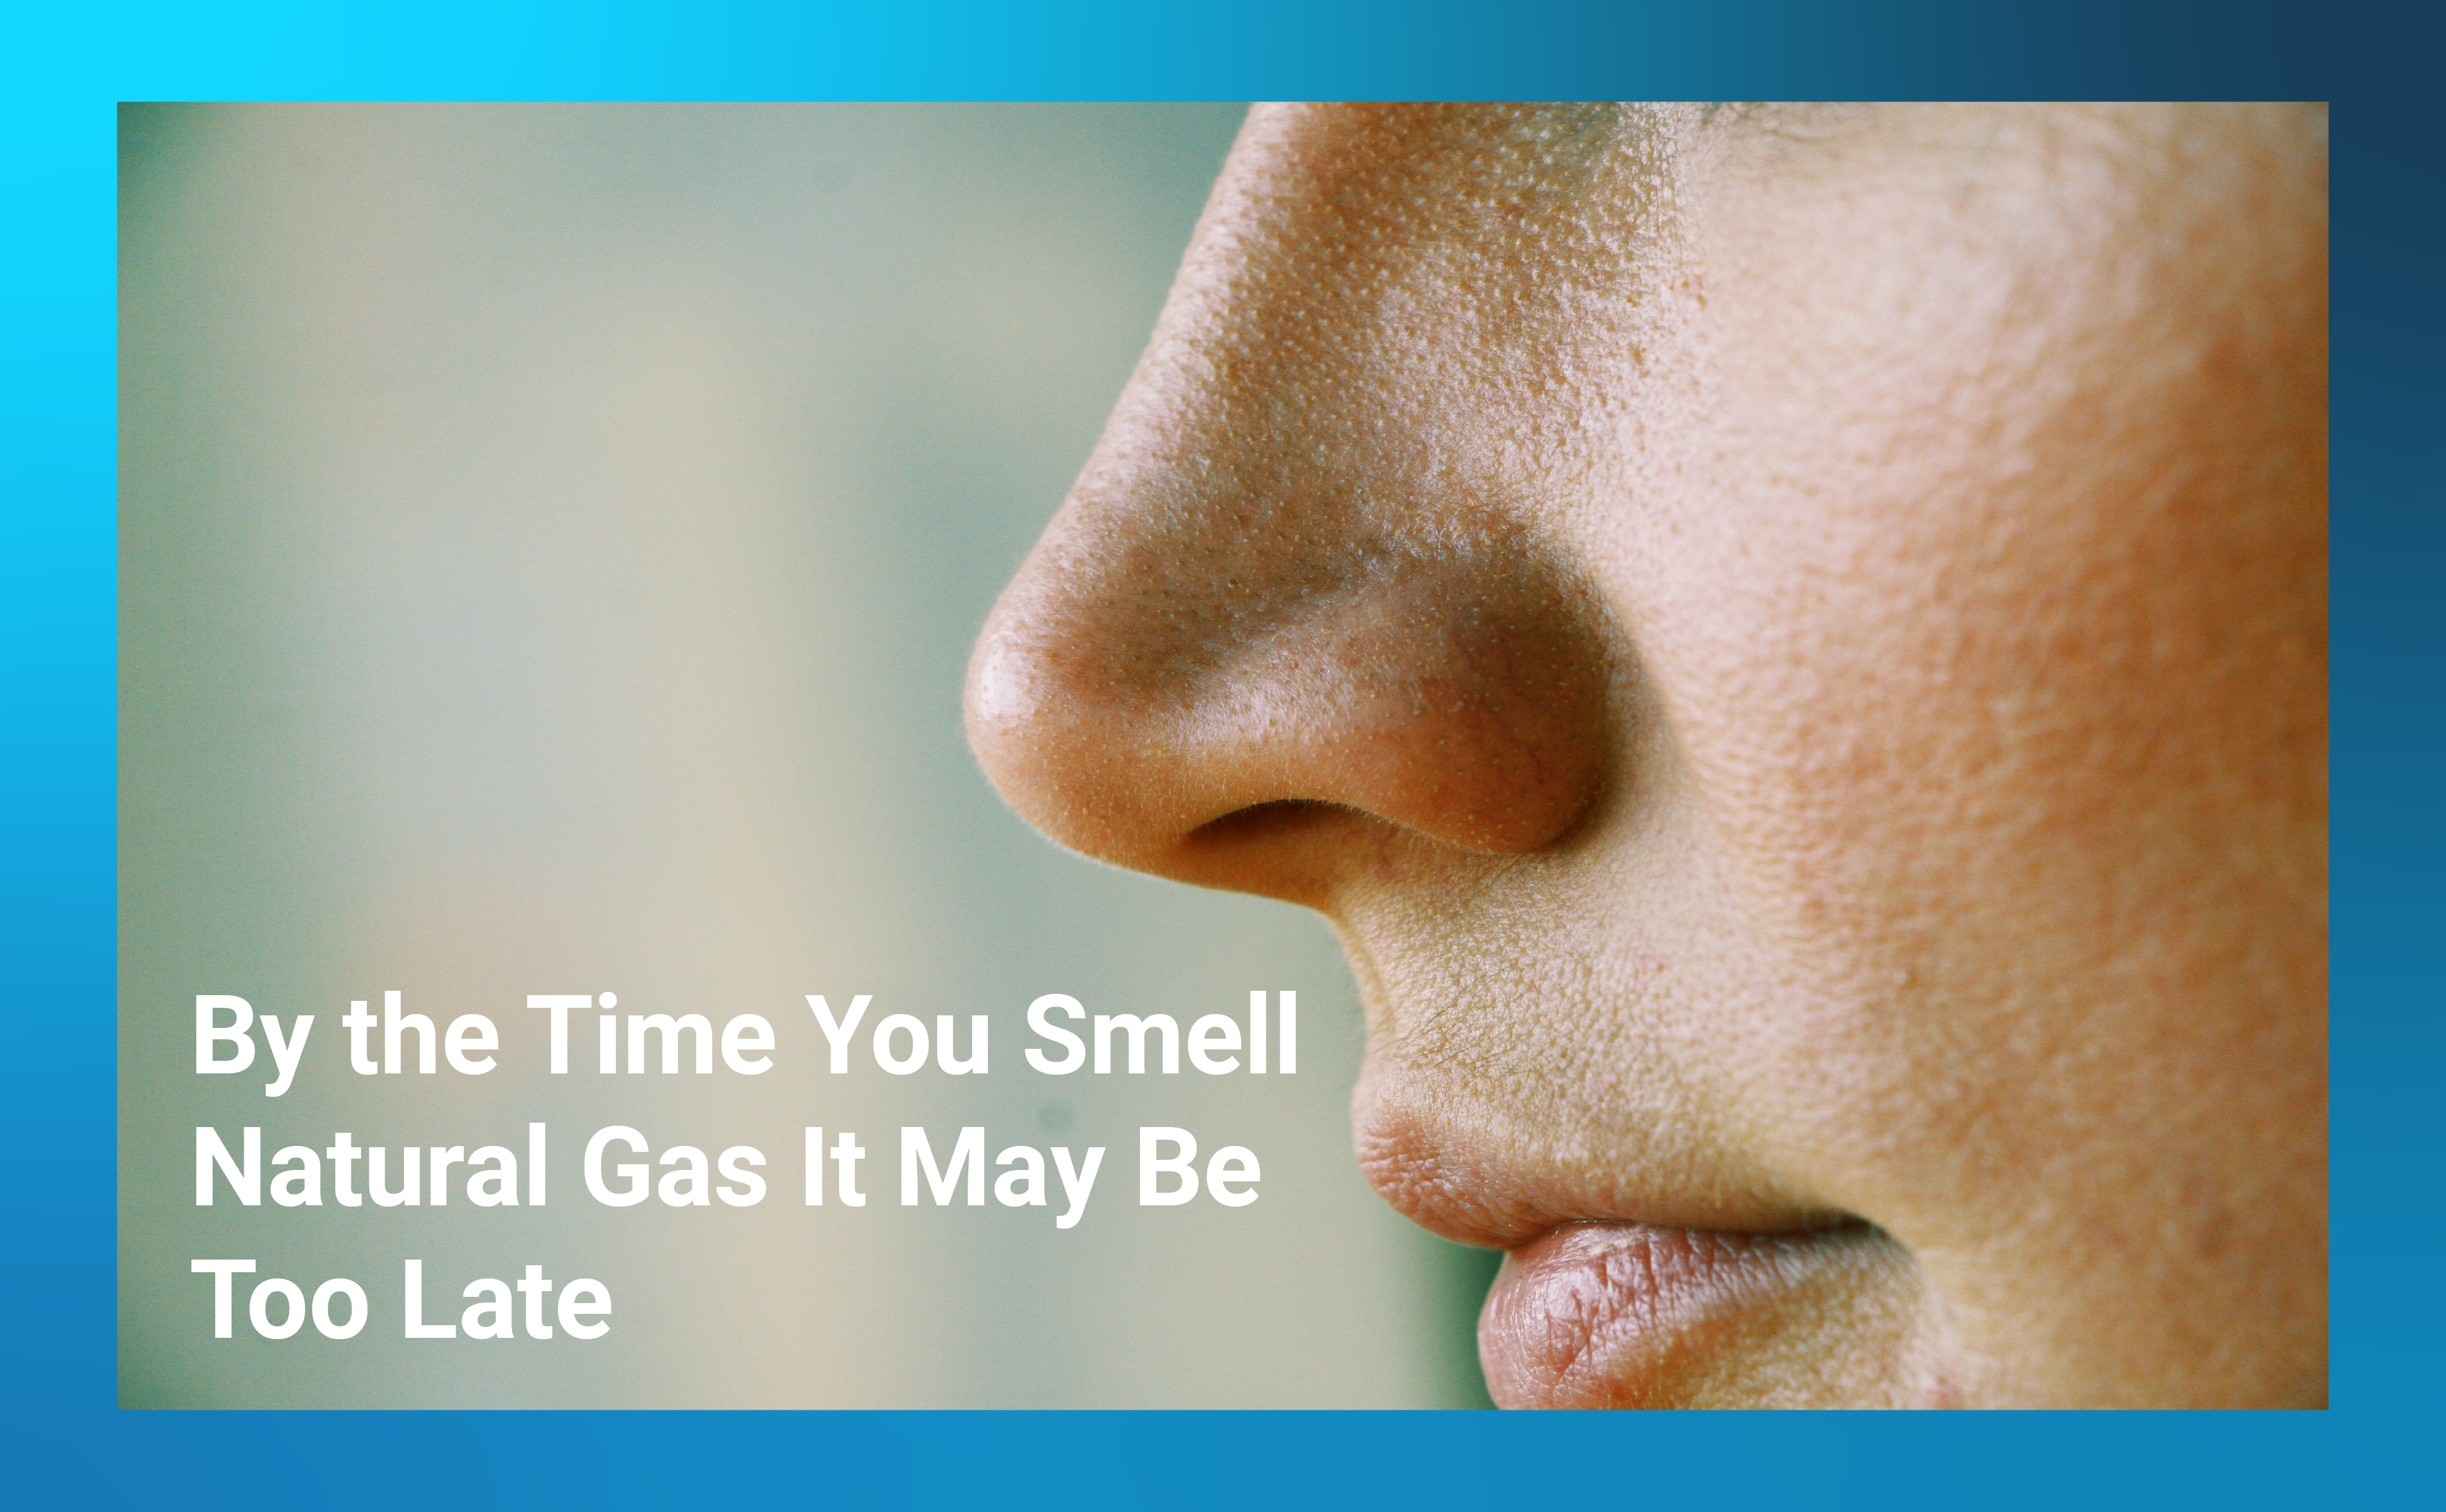 By the Time You Smell Natural Gas It May Be Too Late